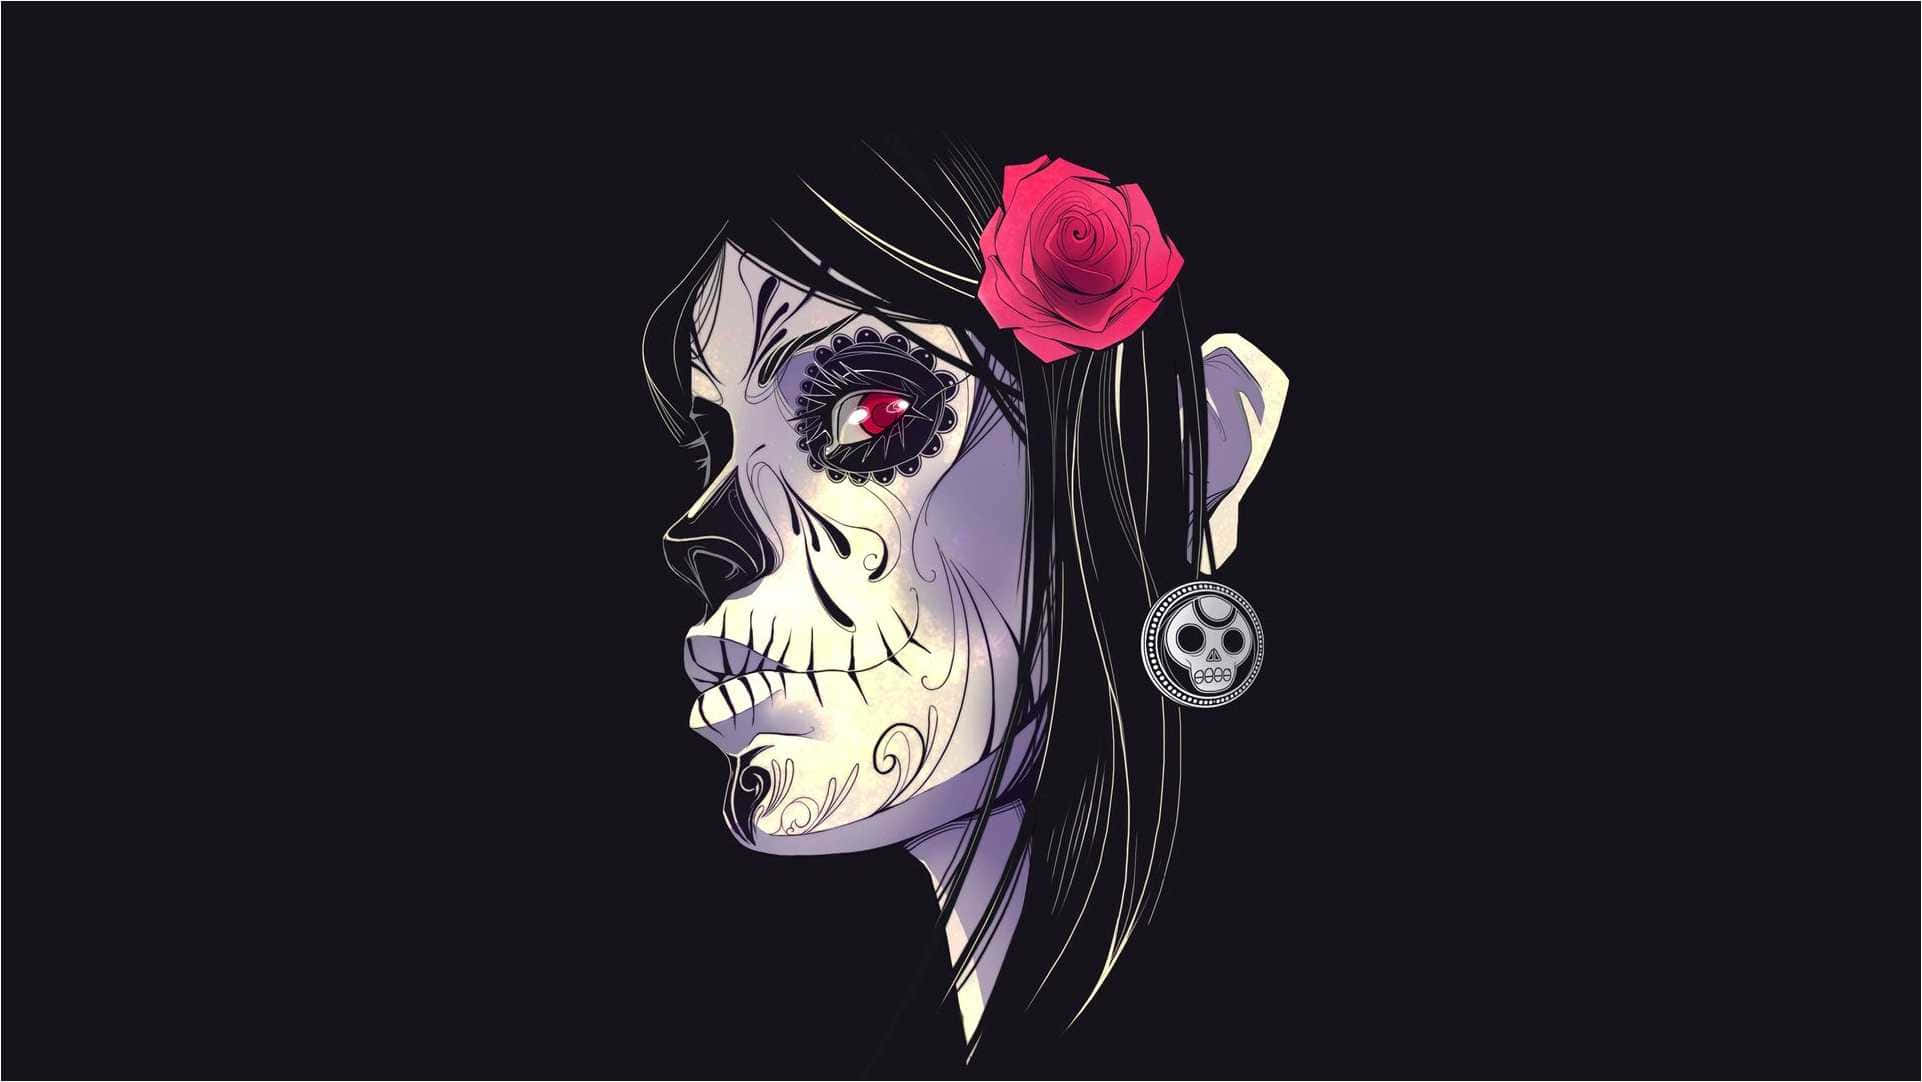 A Woman With A Sugar Skull Face And Red Rose